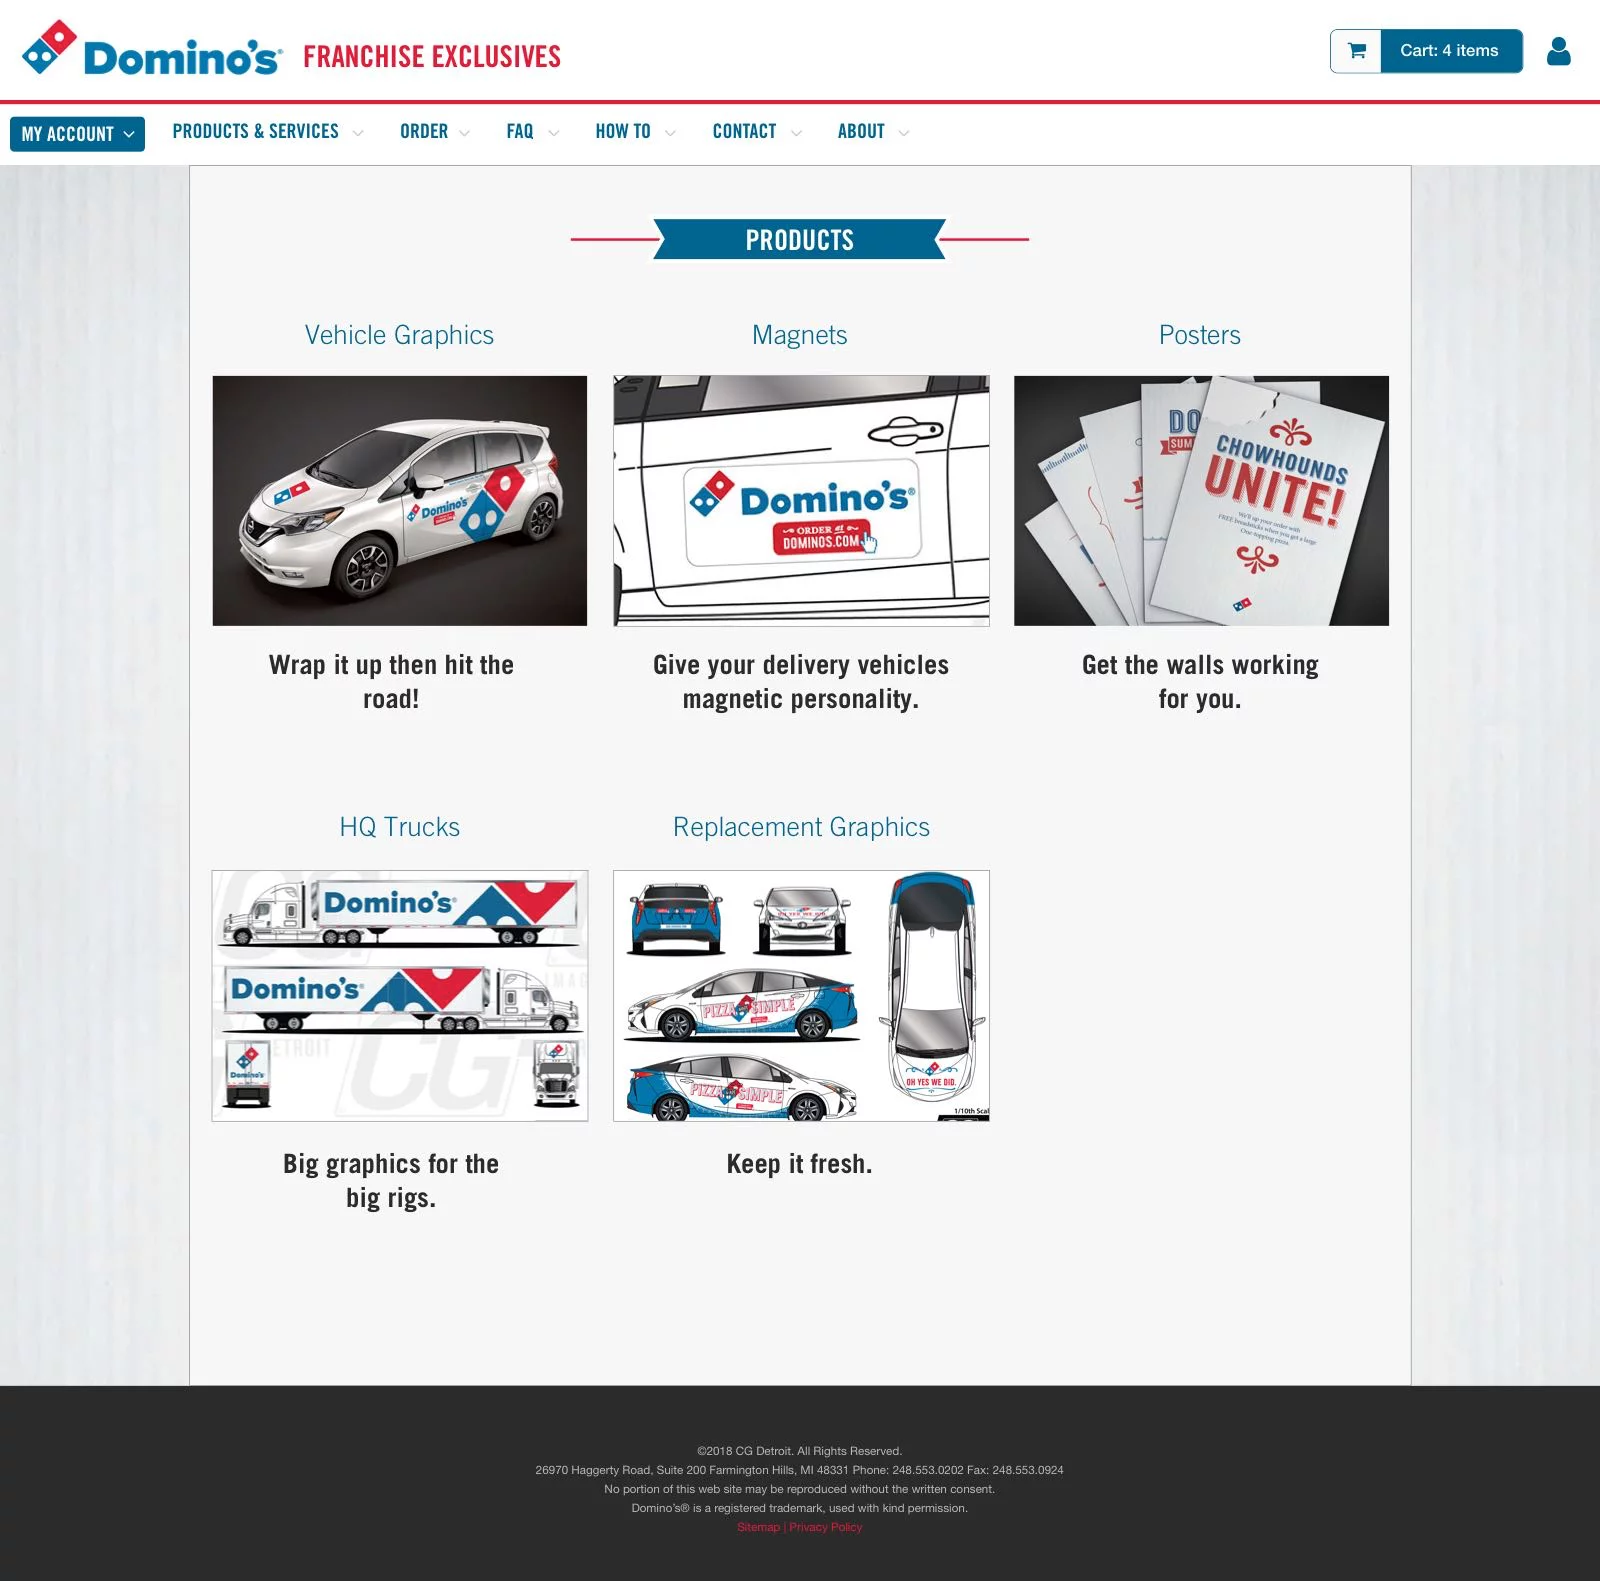 Wireframe - Domino's High Fidelity Vehicle Graphics Category Page (Full Size)